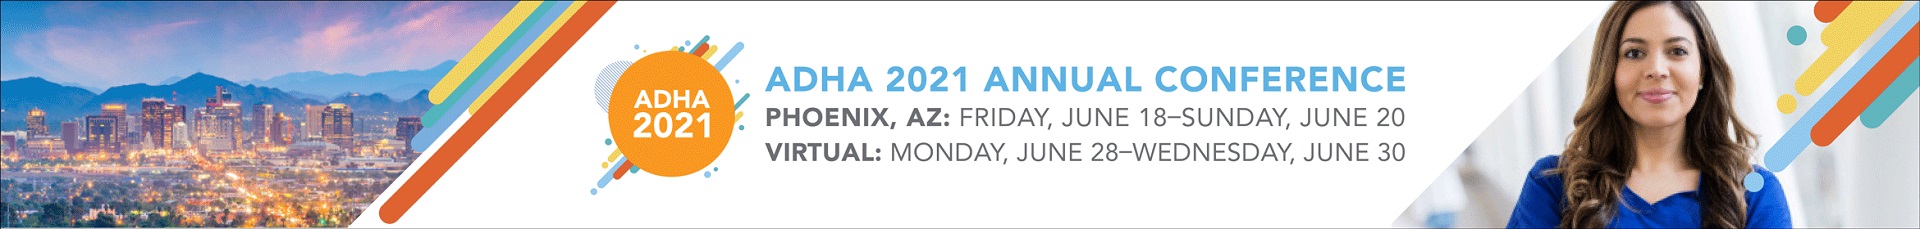 ADHA 2021 Annual Conference  Event Banner